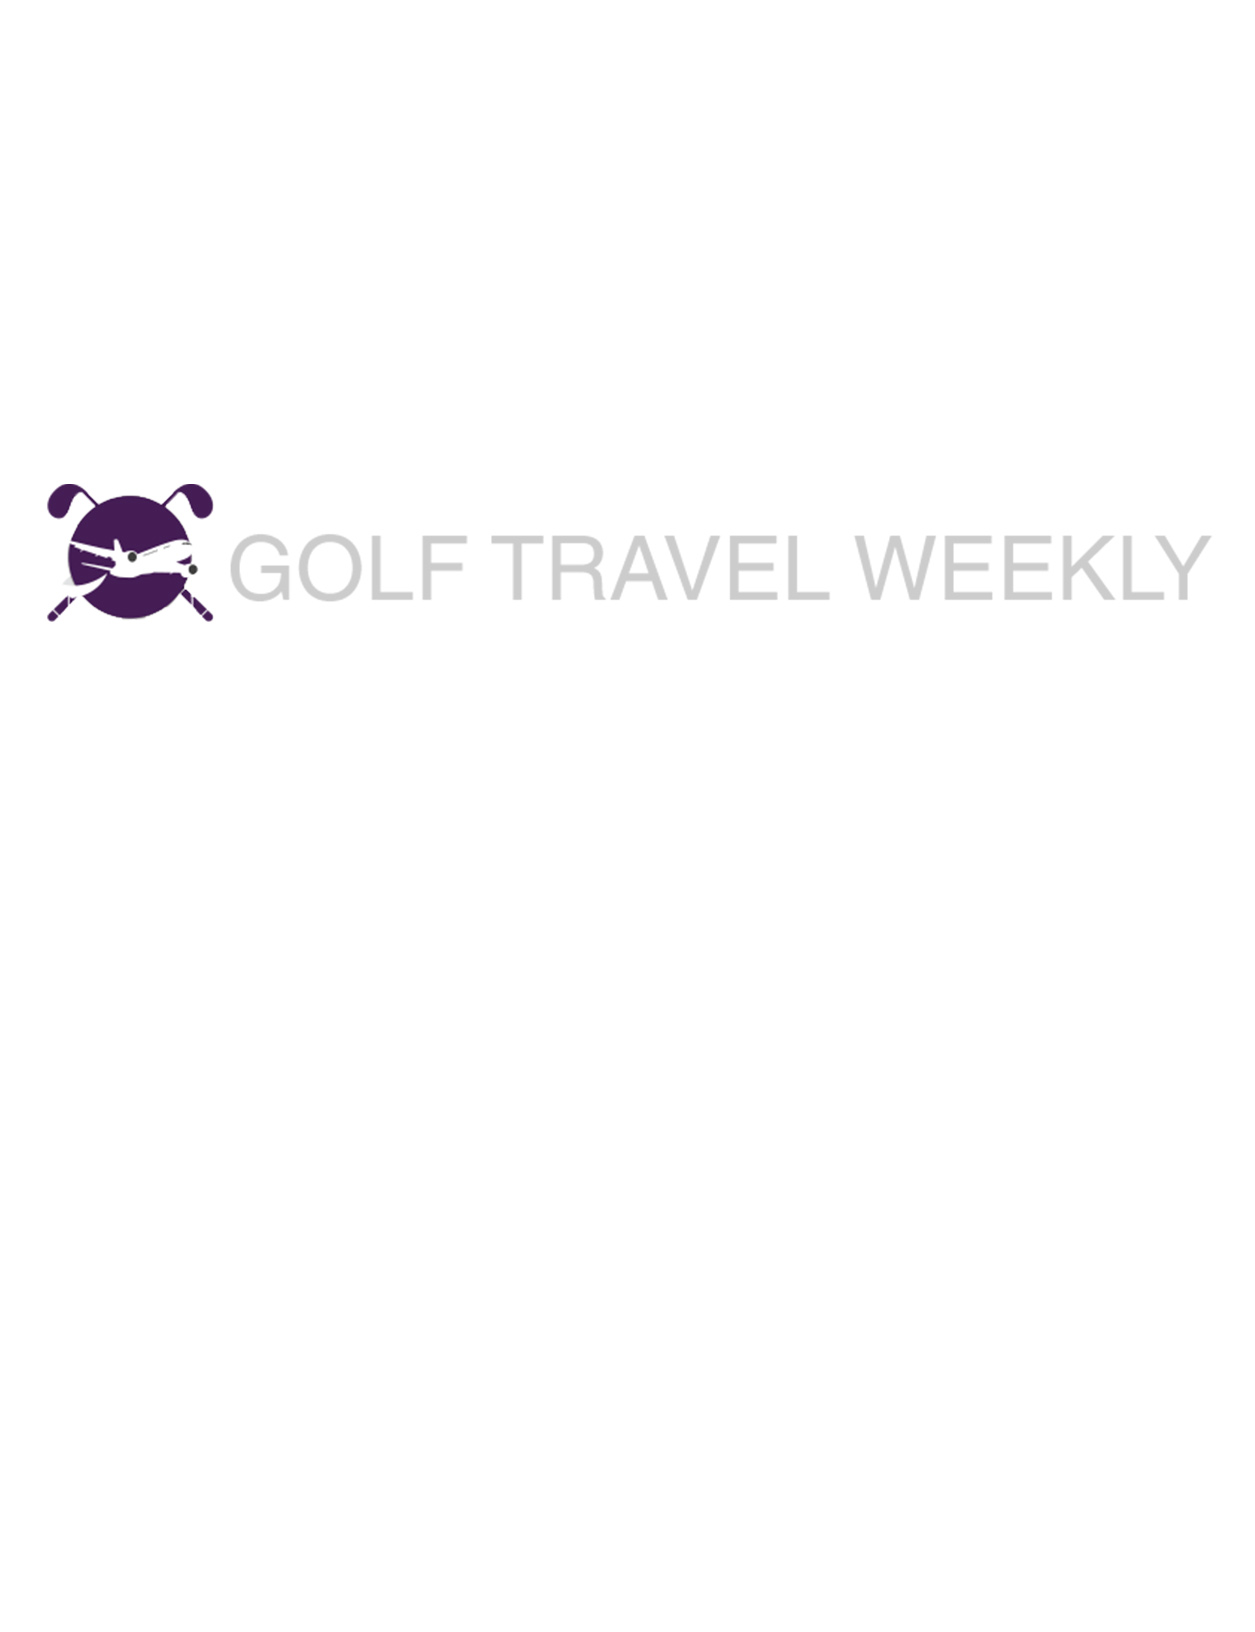 golf travel weekly features an interview with joni vanderslice about golf club design